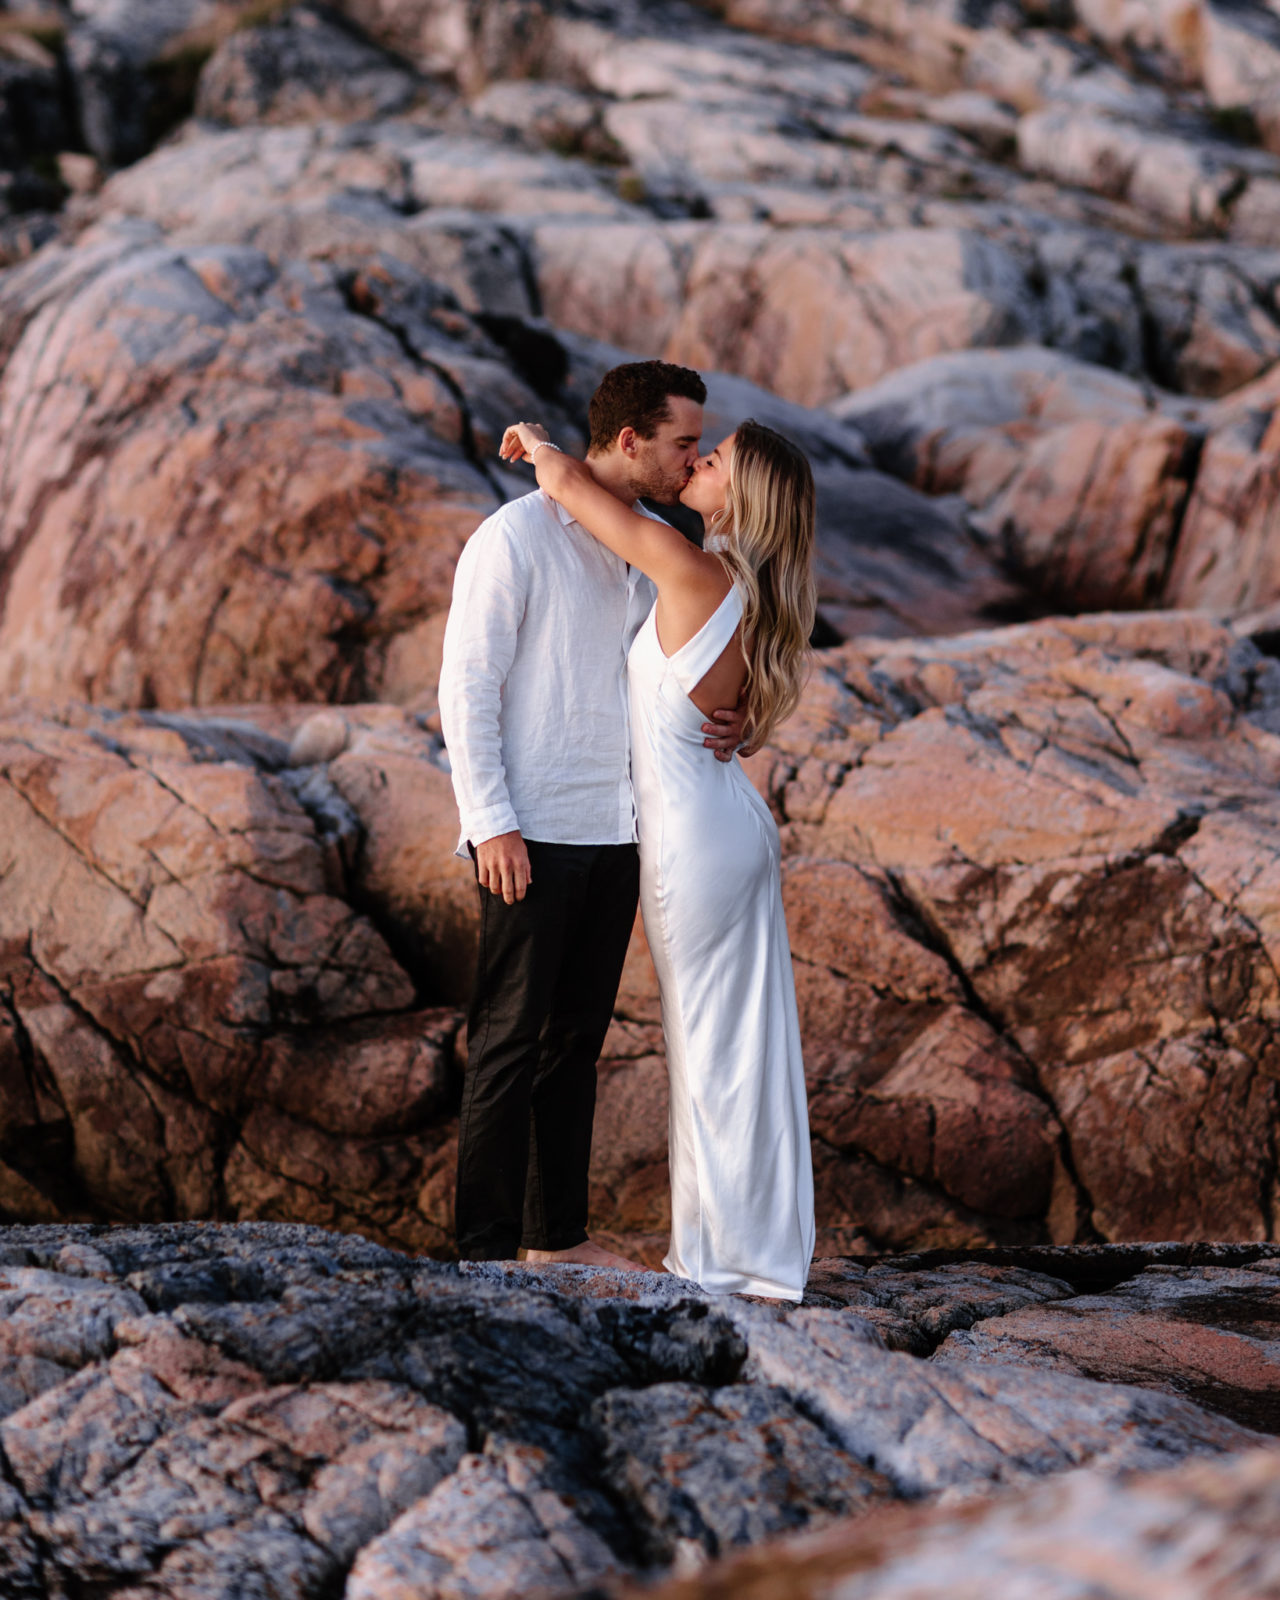 Sunset Engagement Session, summer engagement session, beach engagement, couples photo session, sunset photo session, white satin gown